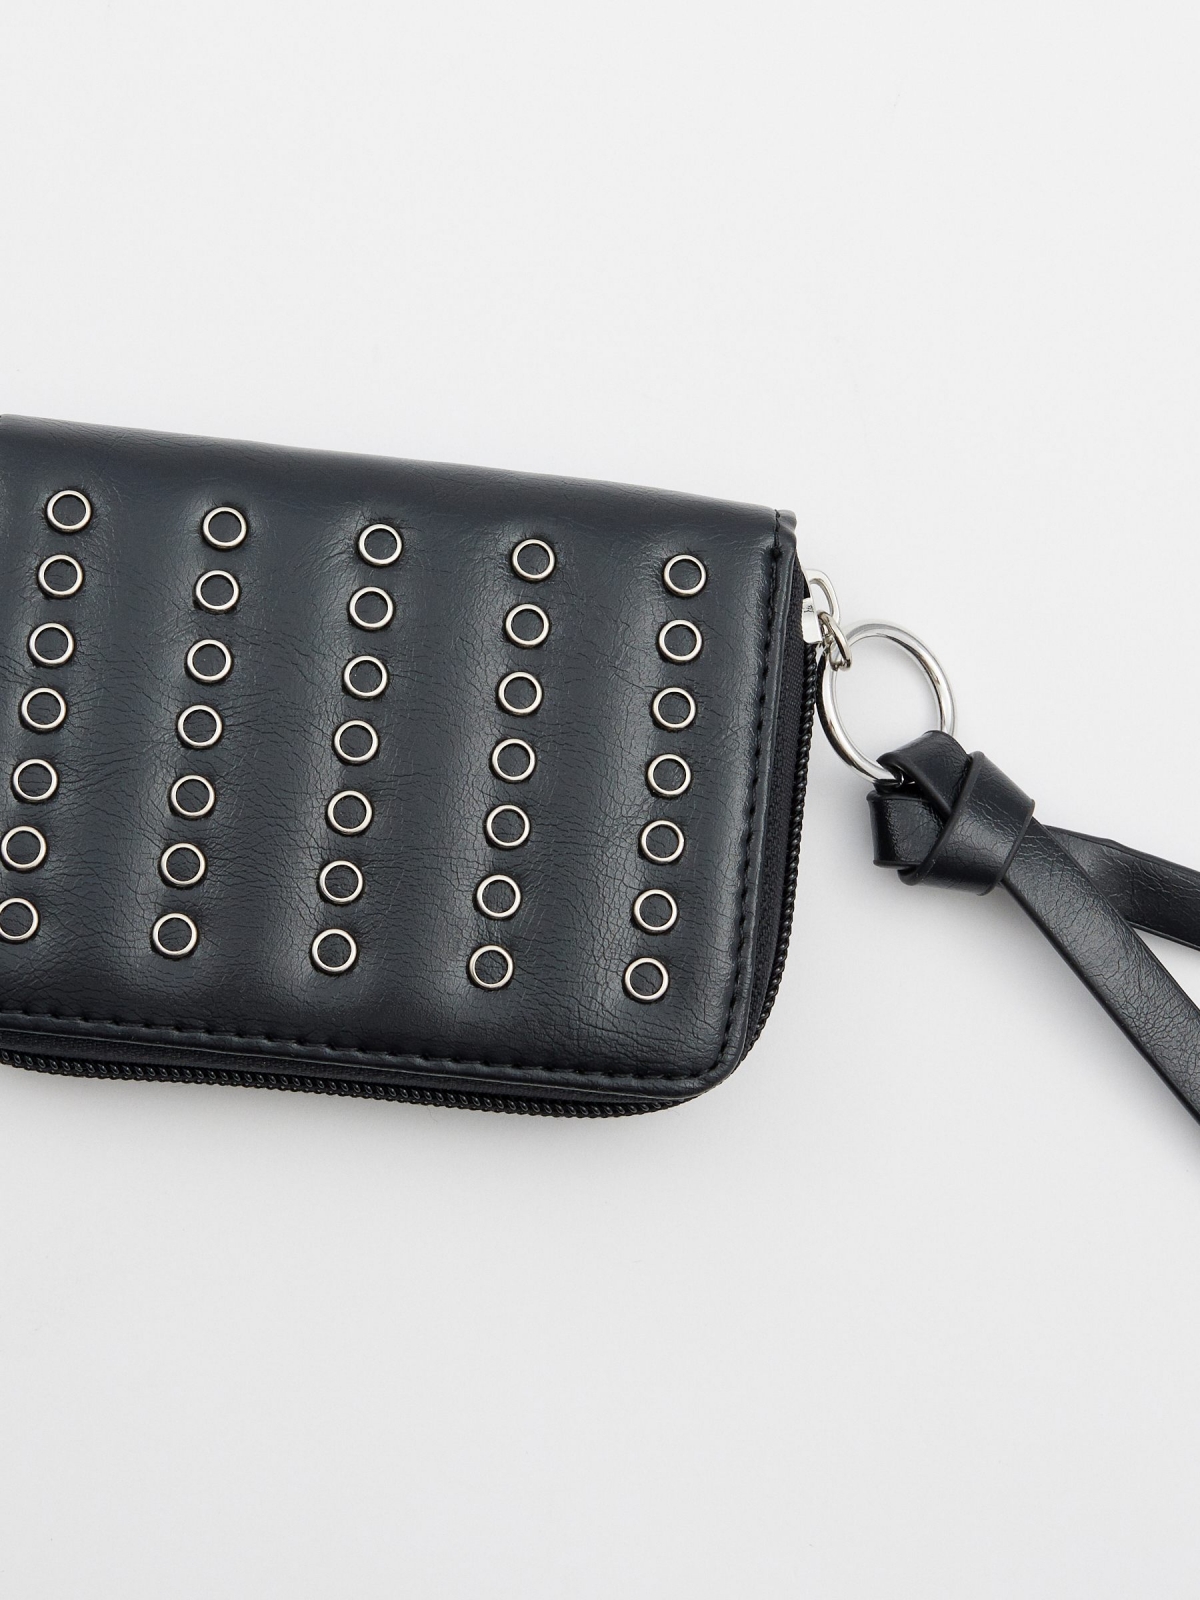 Studded leather effect purse black back view